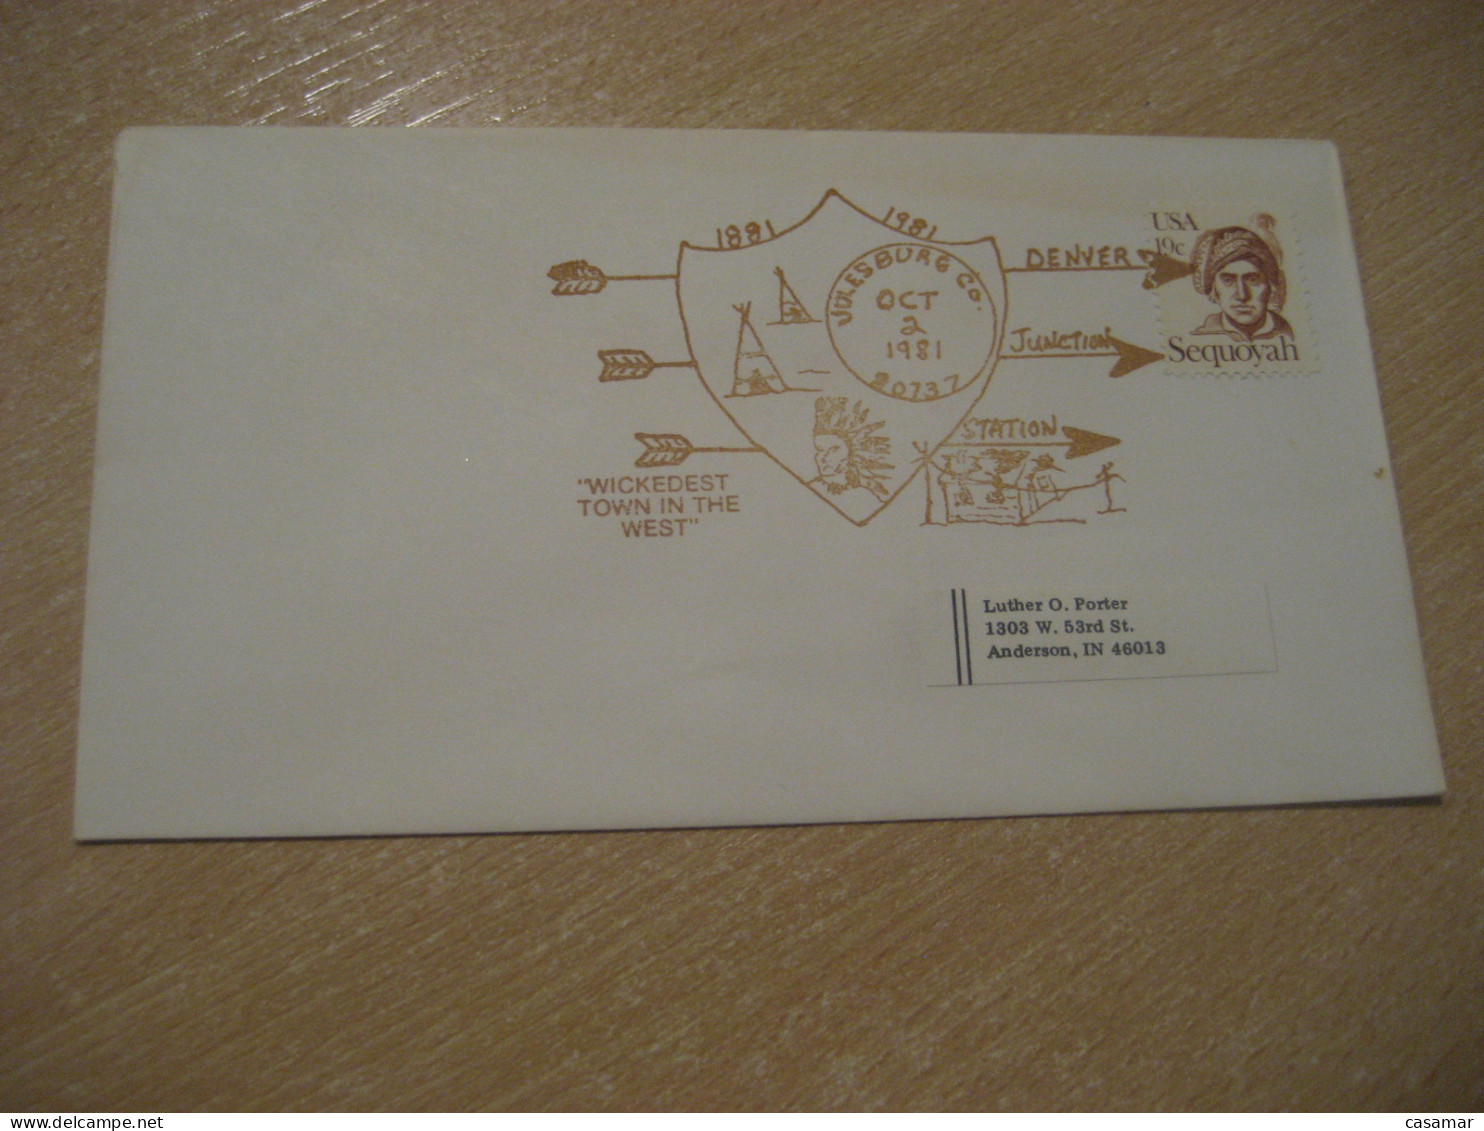 JULESBURG 1981 Wickedest Town In The West American Indians Indian Cancel Cover USA Indigenous Native History - American Indians